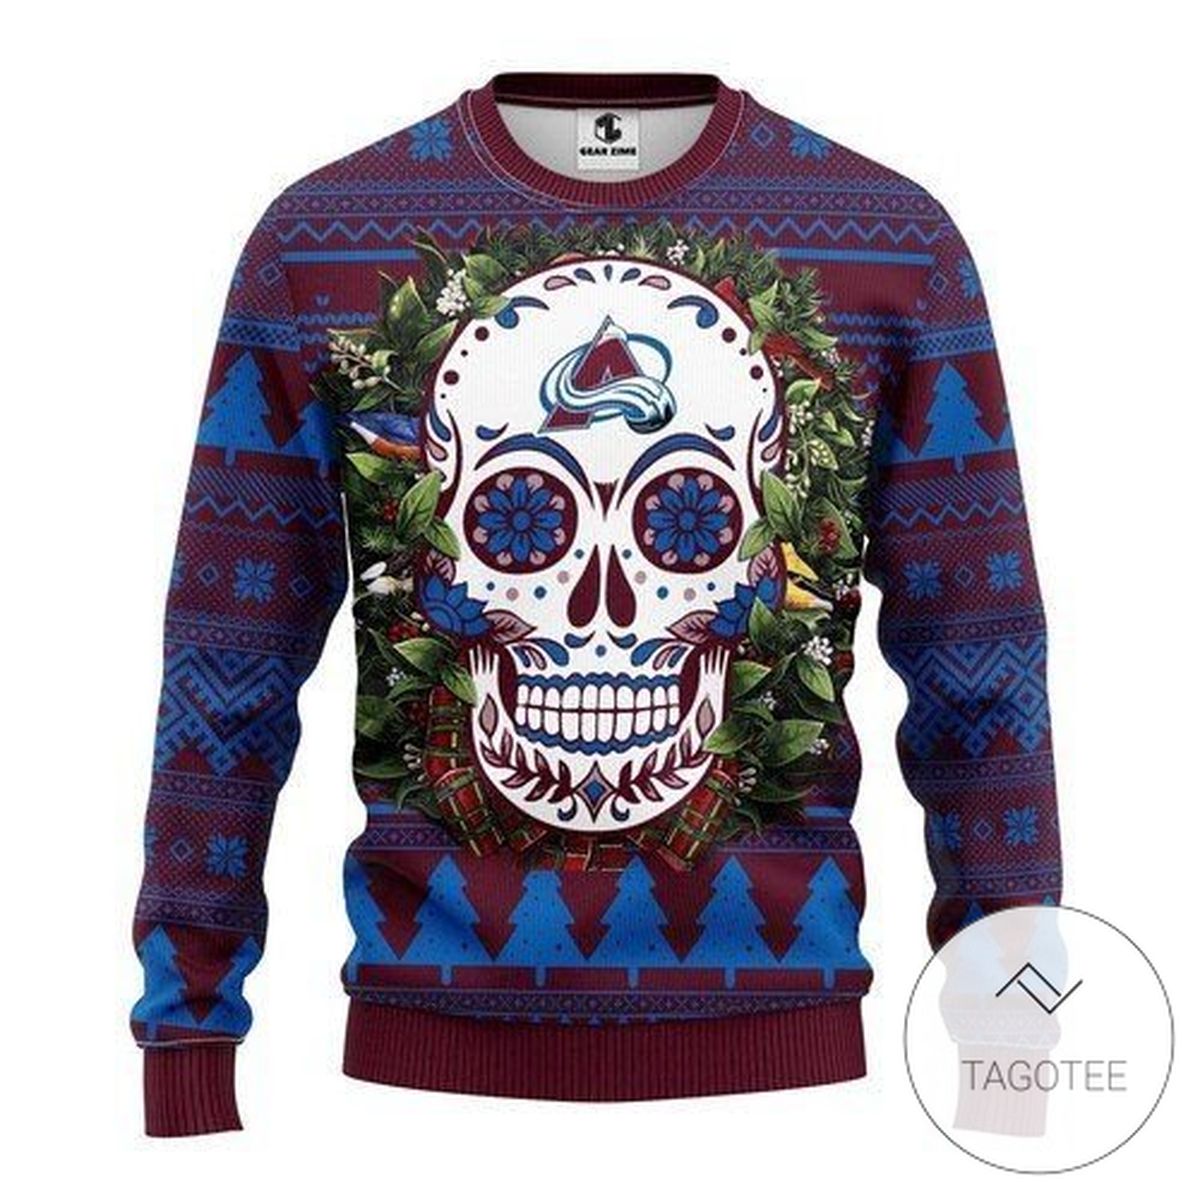 Colorado Avalanche Skull Flower For Unisex Sweatshirt Knitted Ugly Christmas Sweater